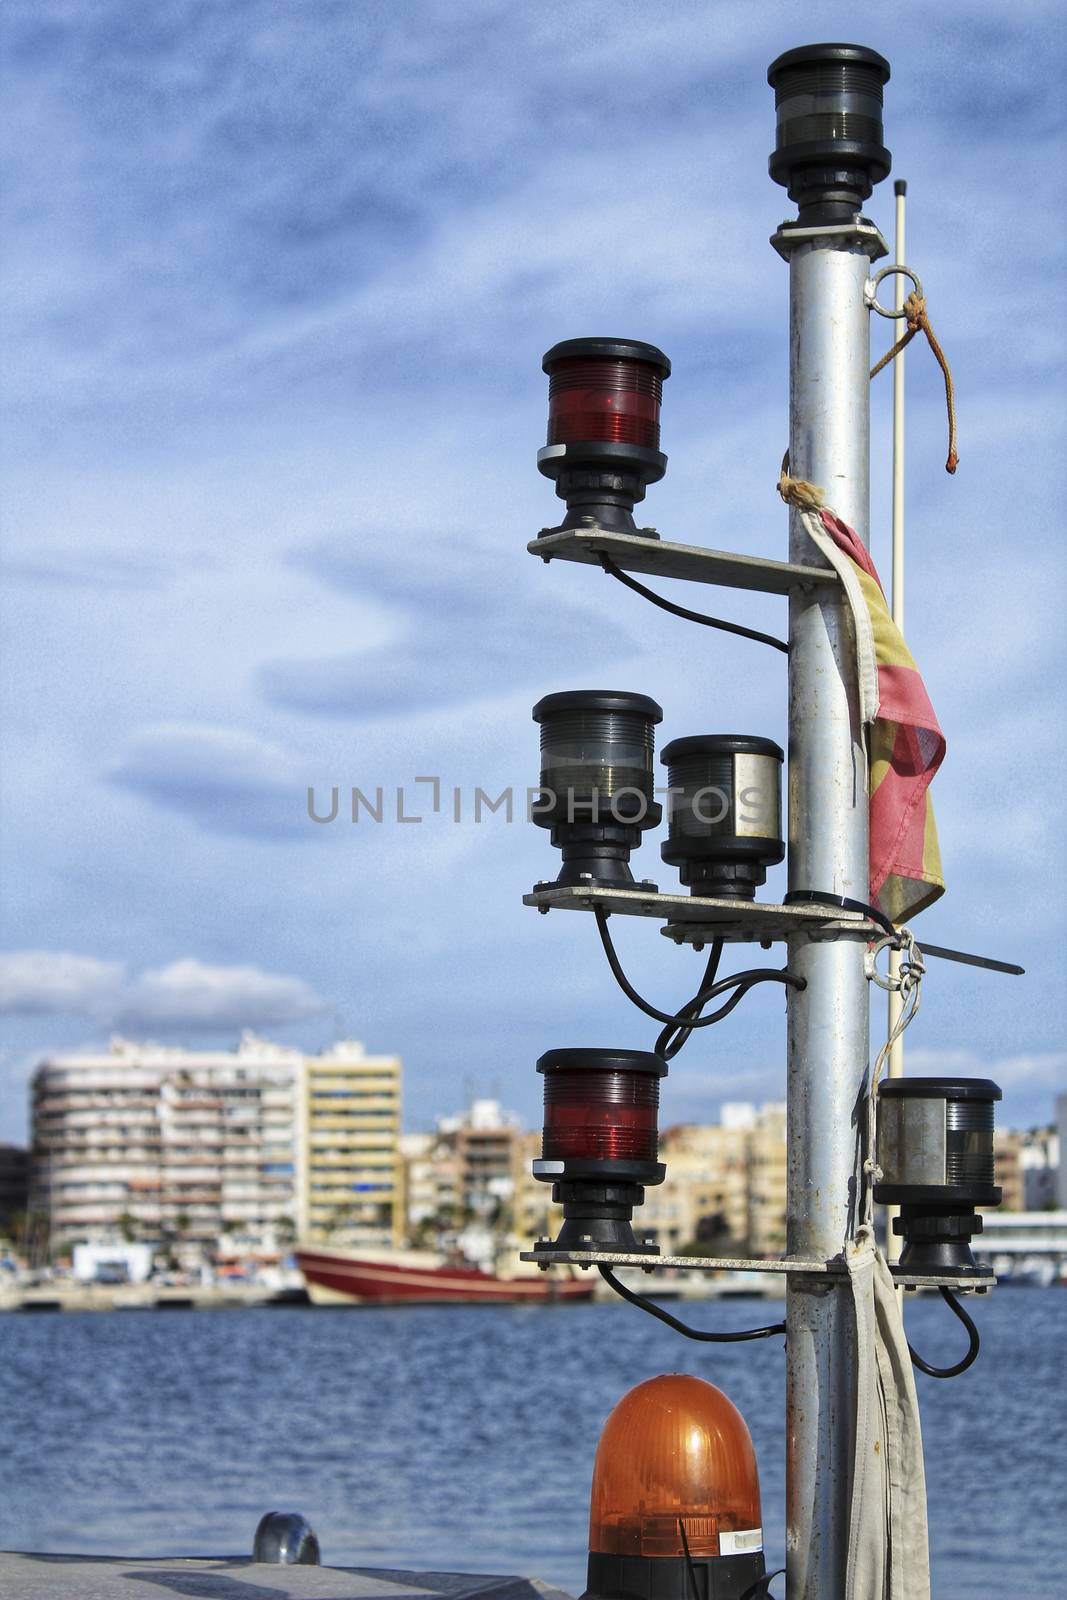 Lighting equipment on a boat by soniabonet